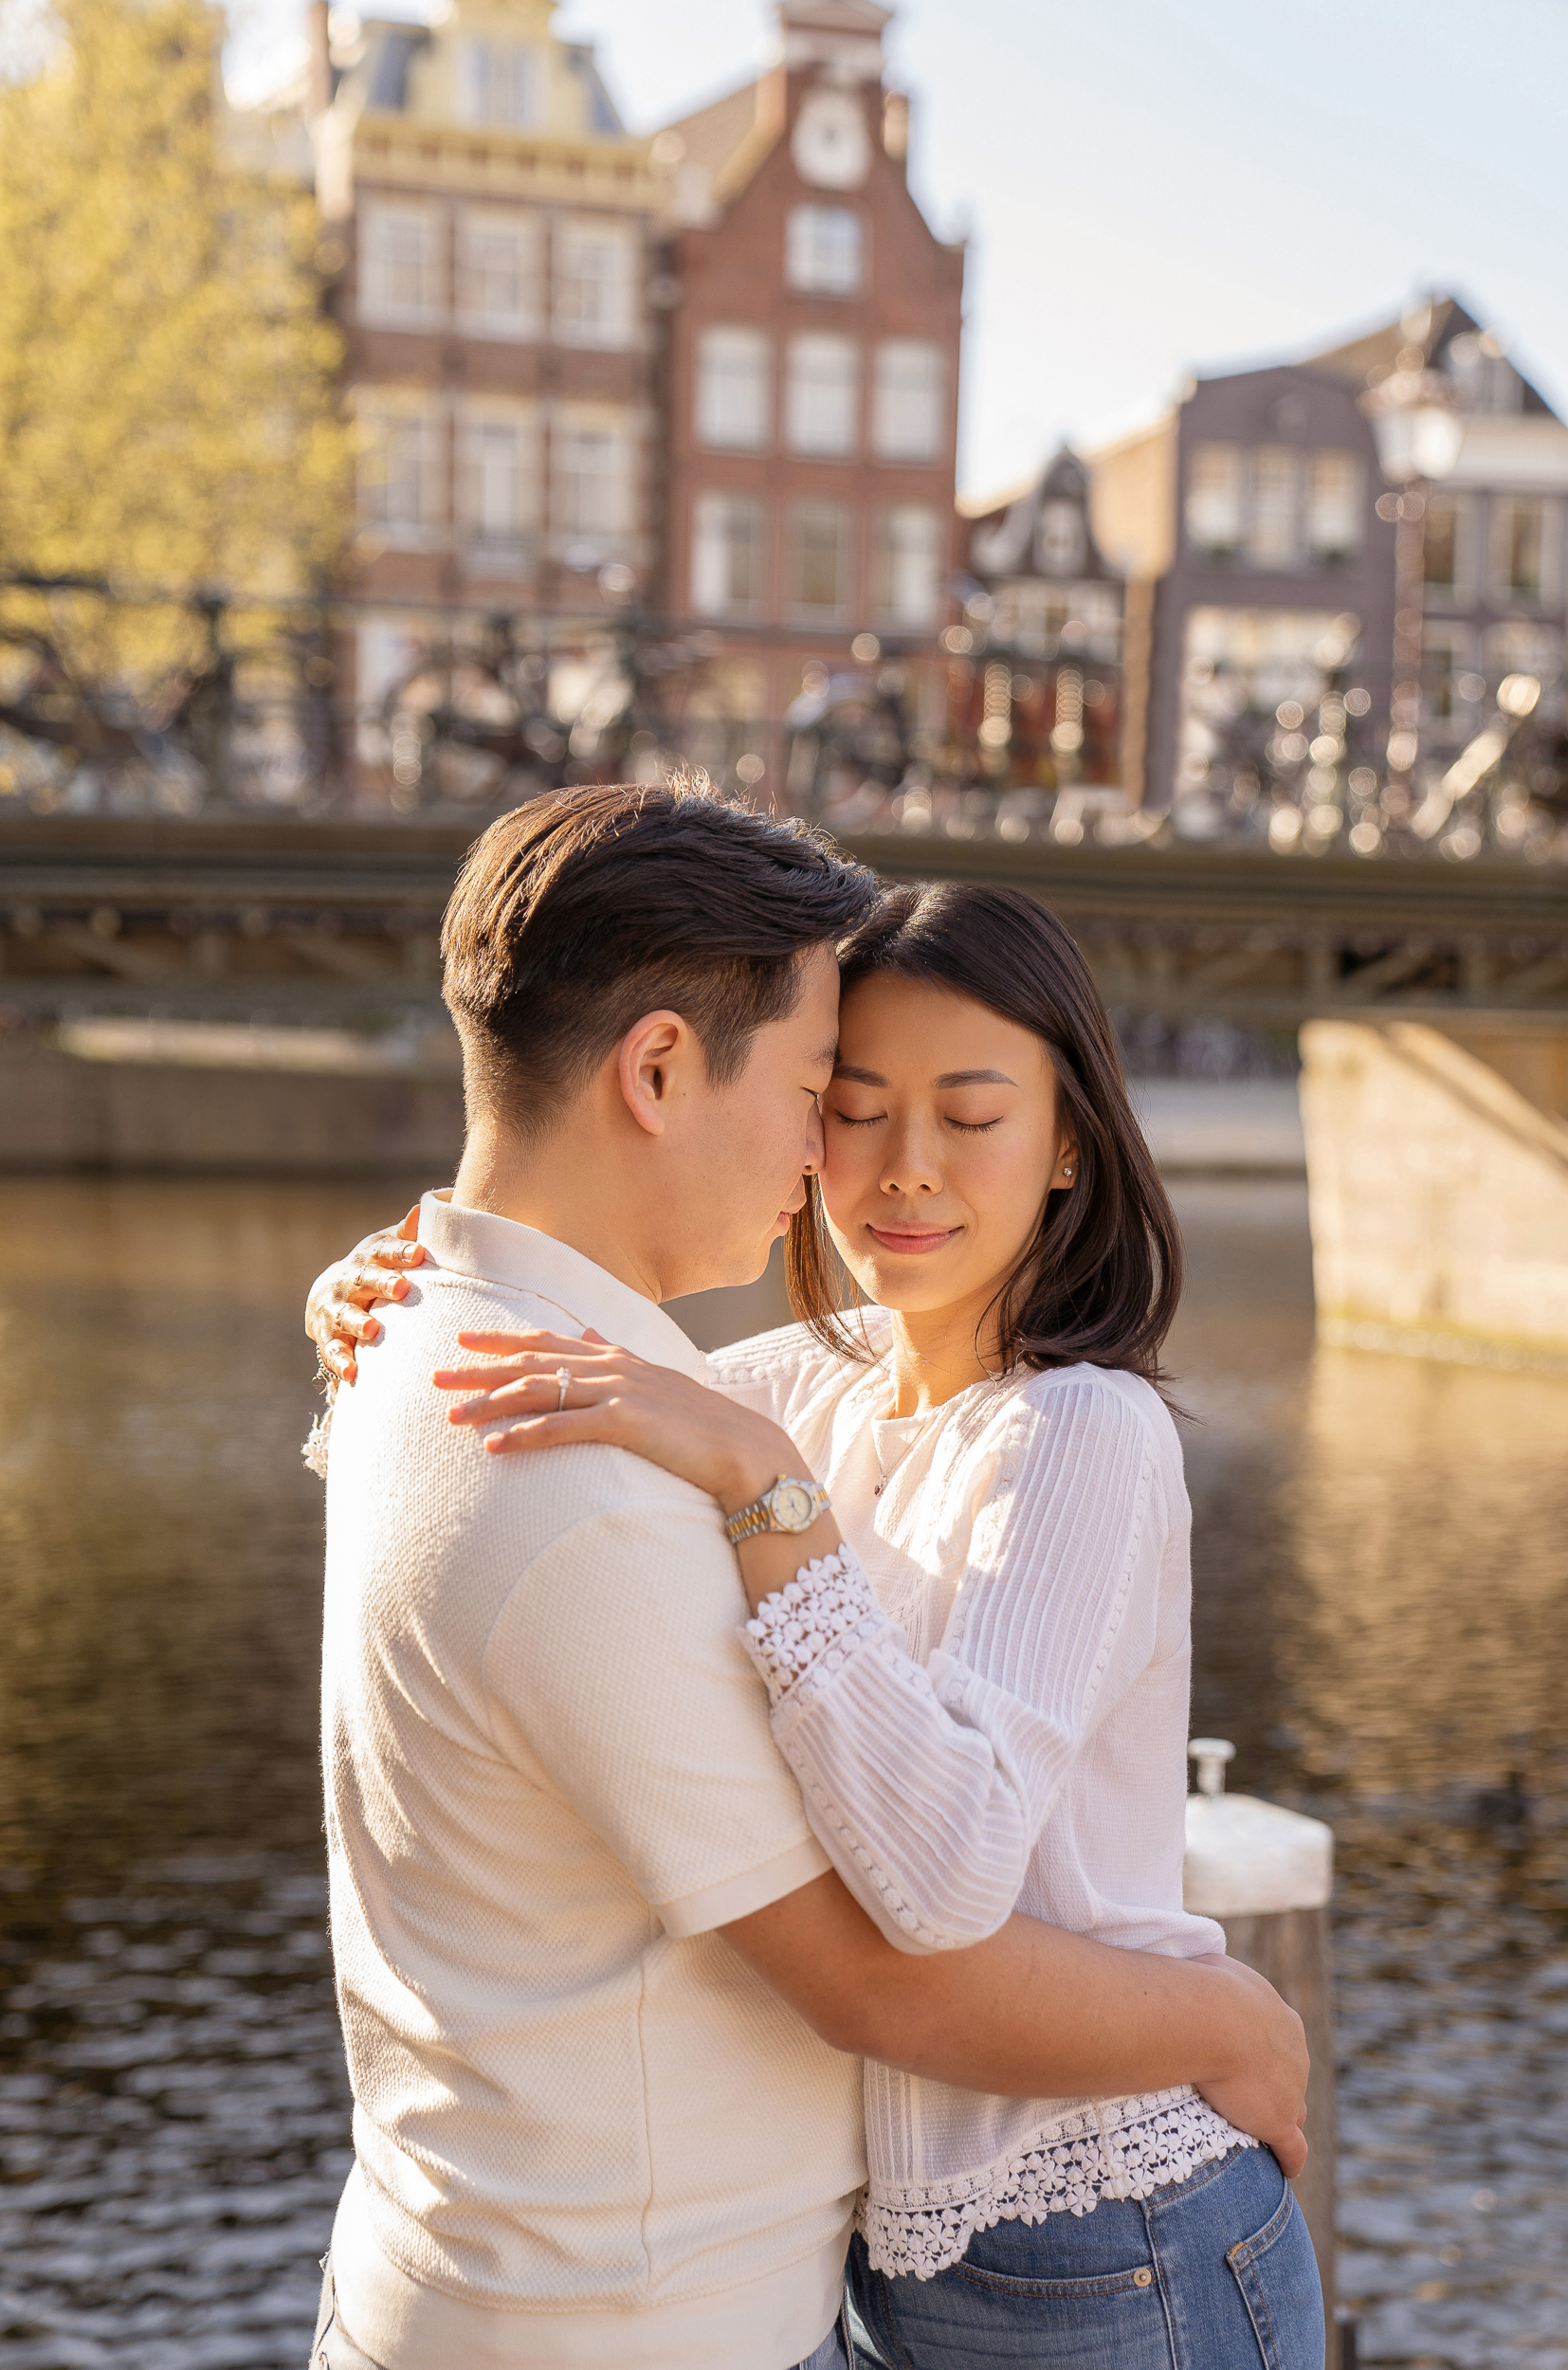 An engaged couple hugging each other in the Amsterdam canals.